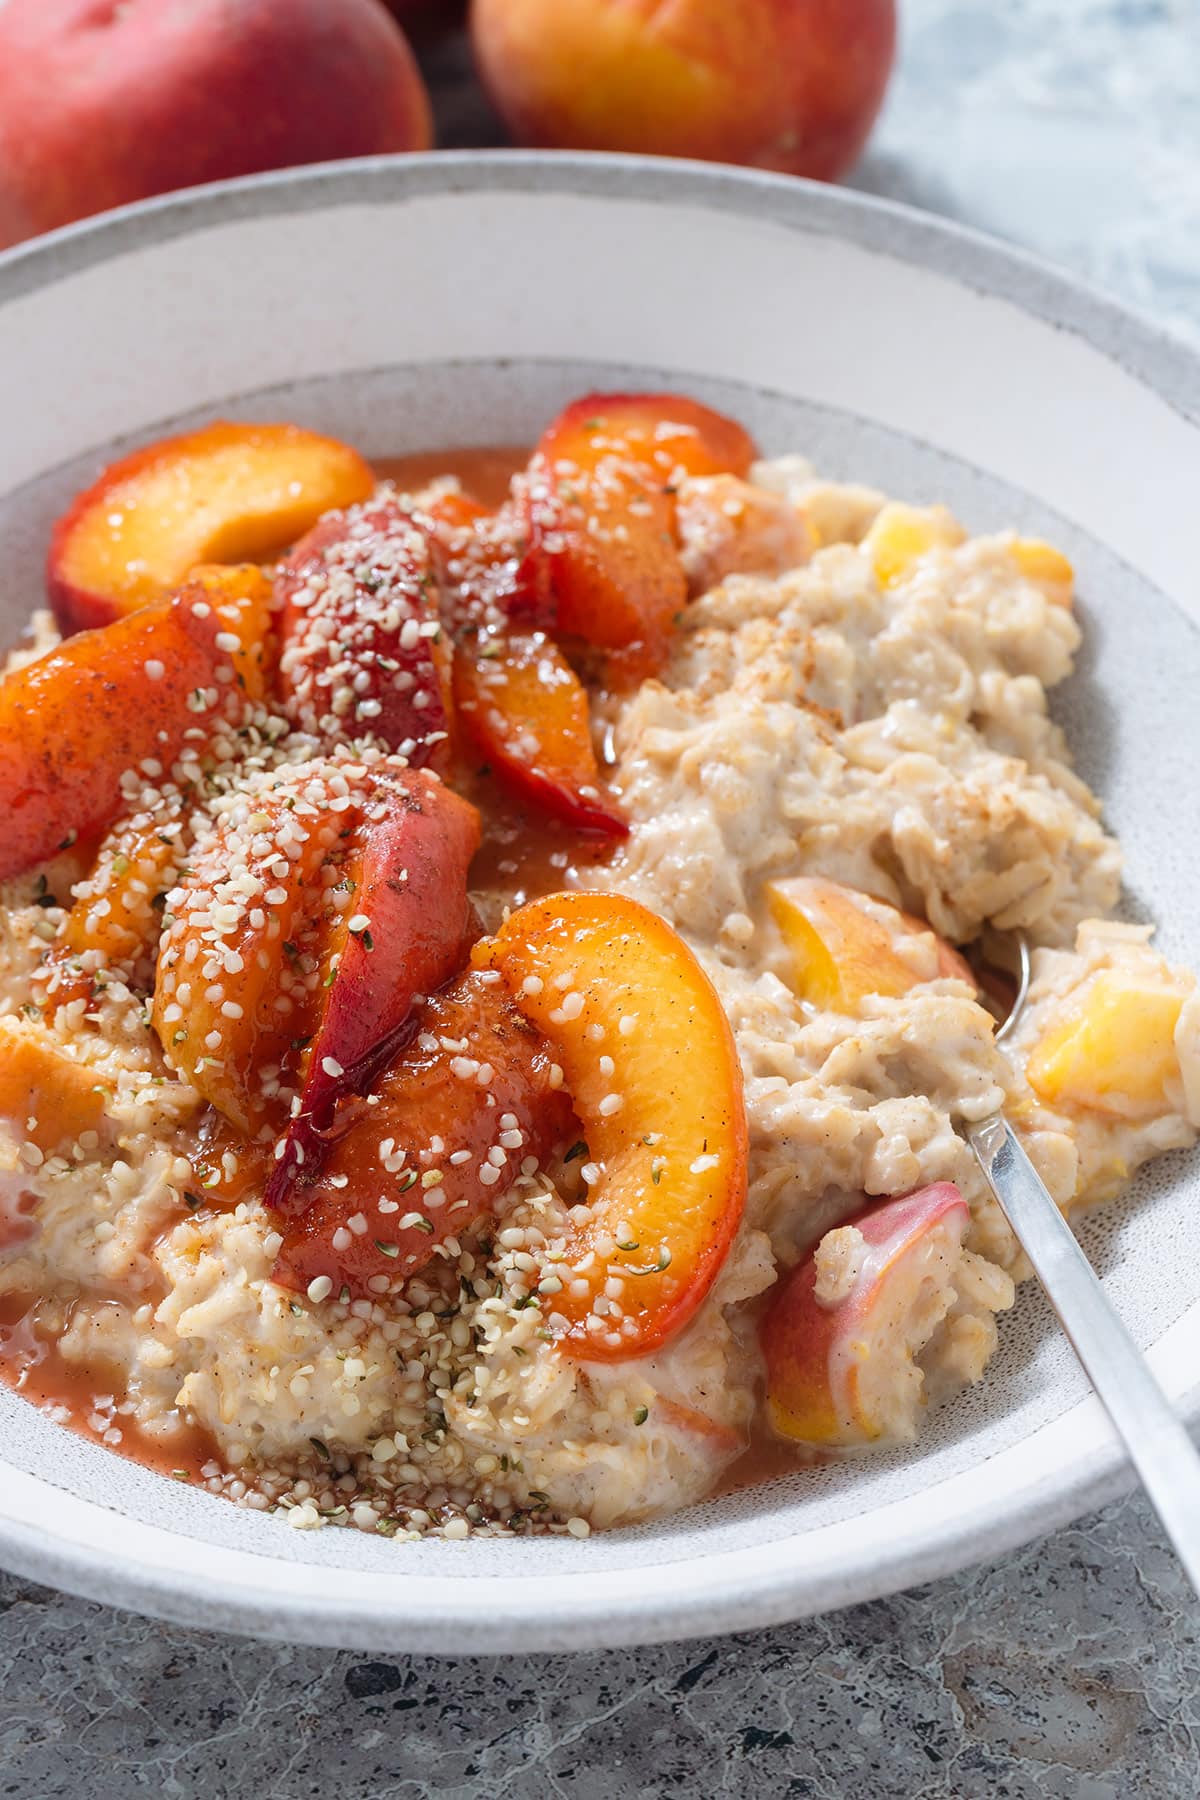 Creamy peach oatmeal with caramelized peaches and hemp seeds on top in a a grey bowl.